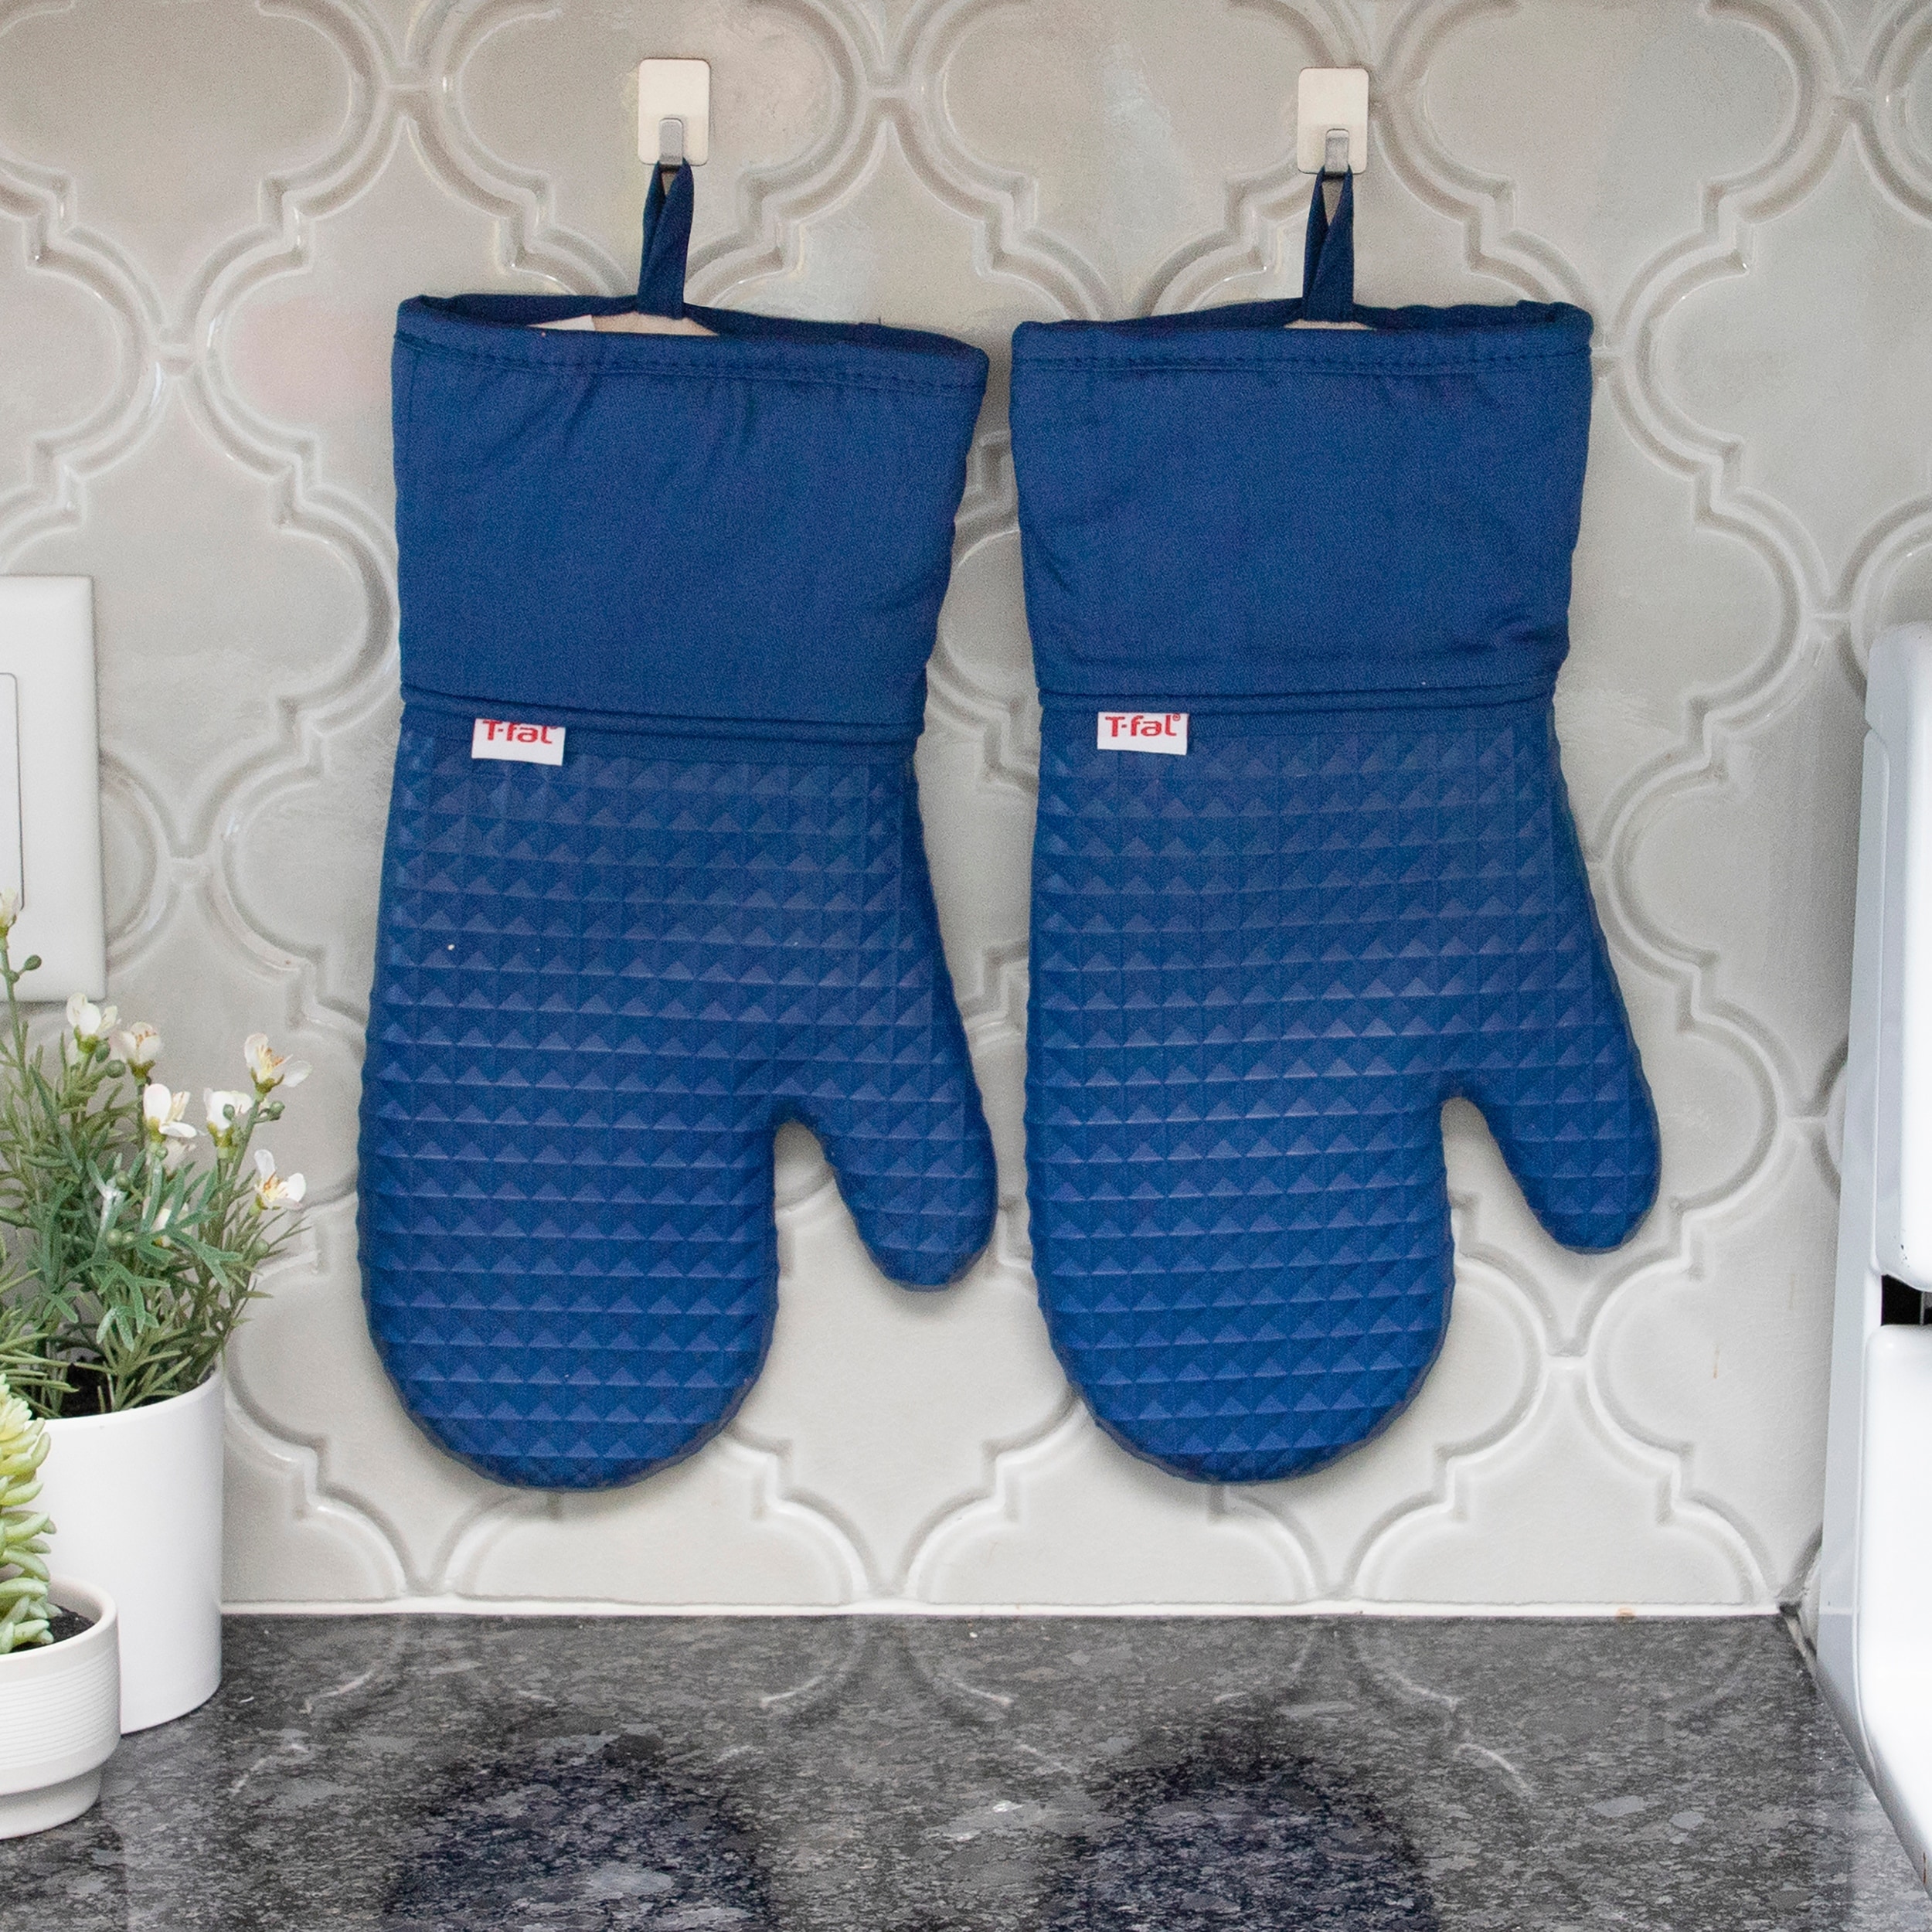 Food52 Quilted Oven Mitts, Linen & Cotton, Set of 2, 3 Colors on